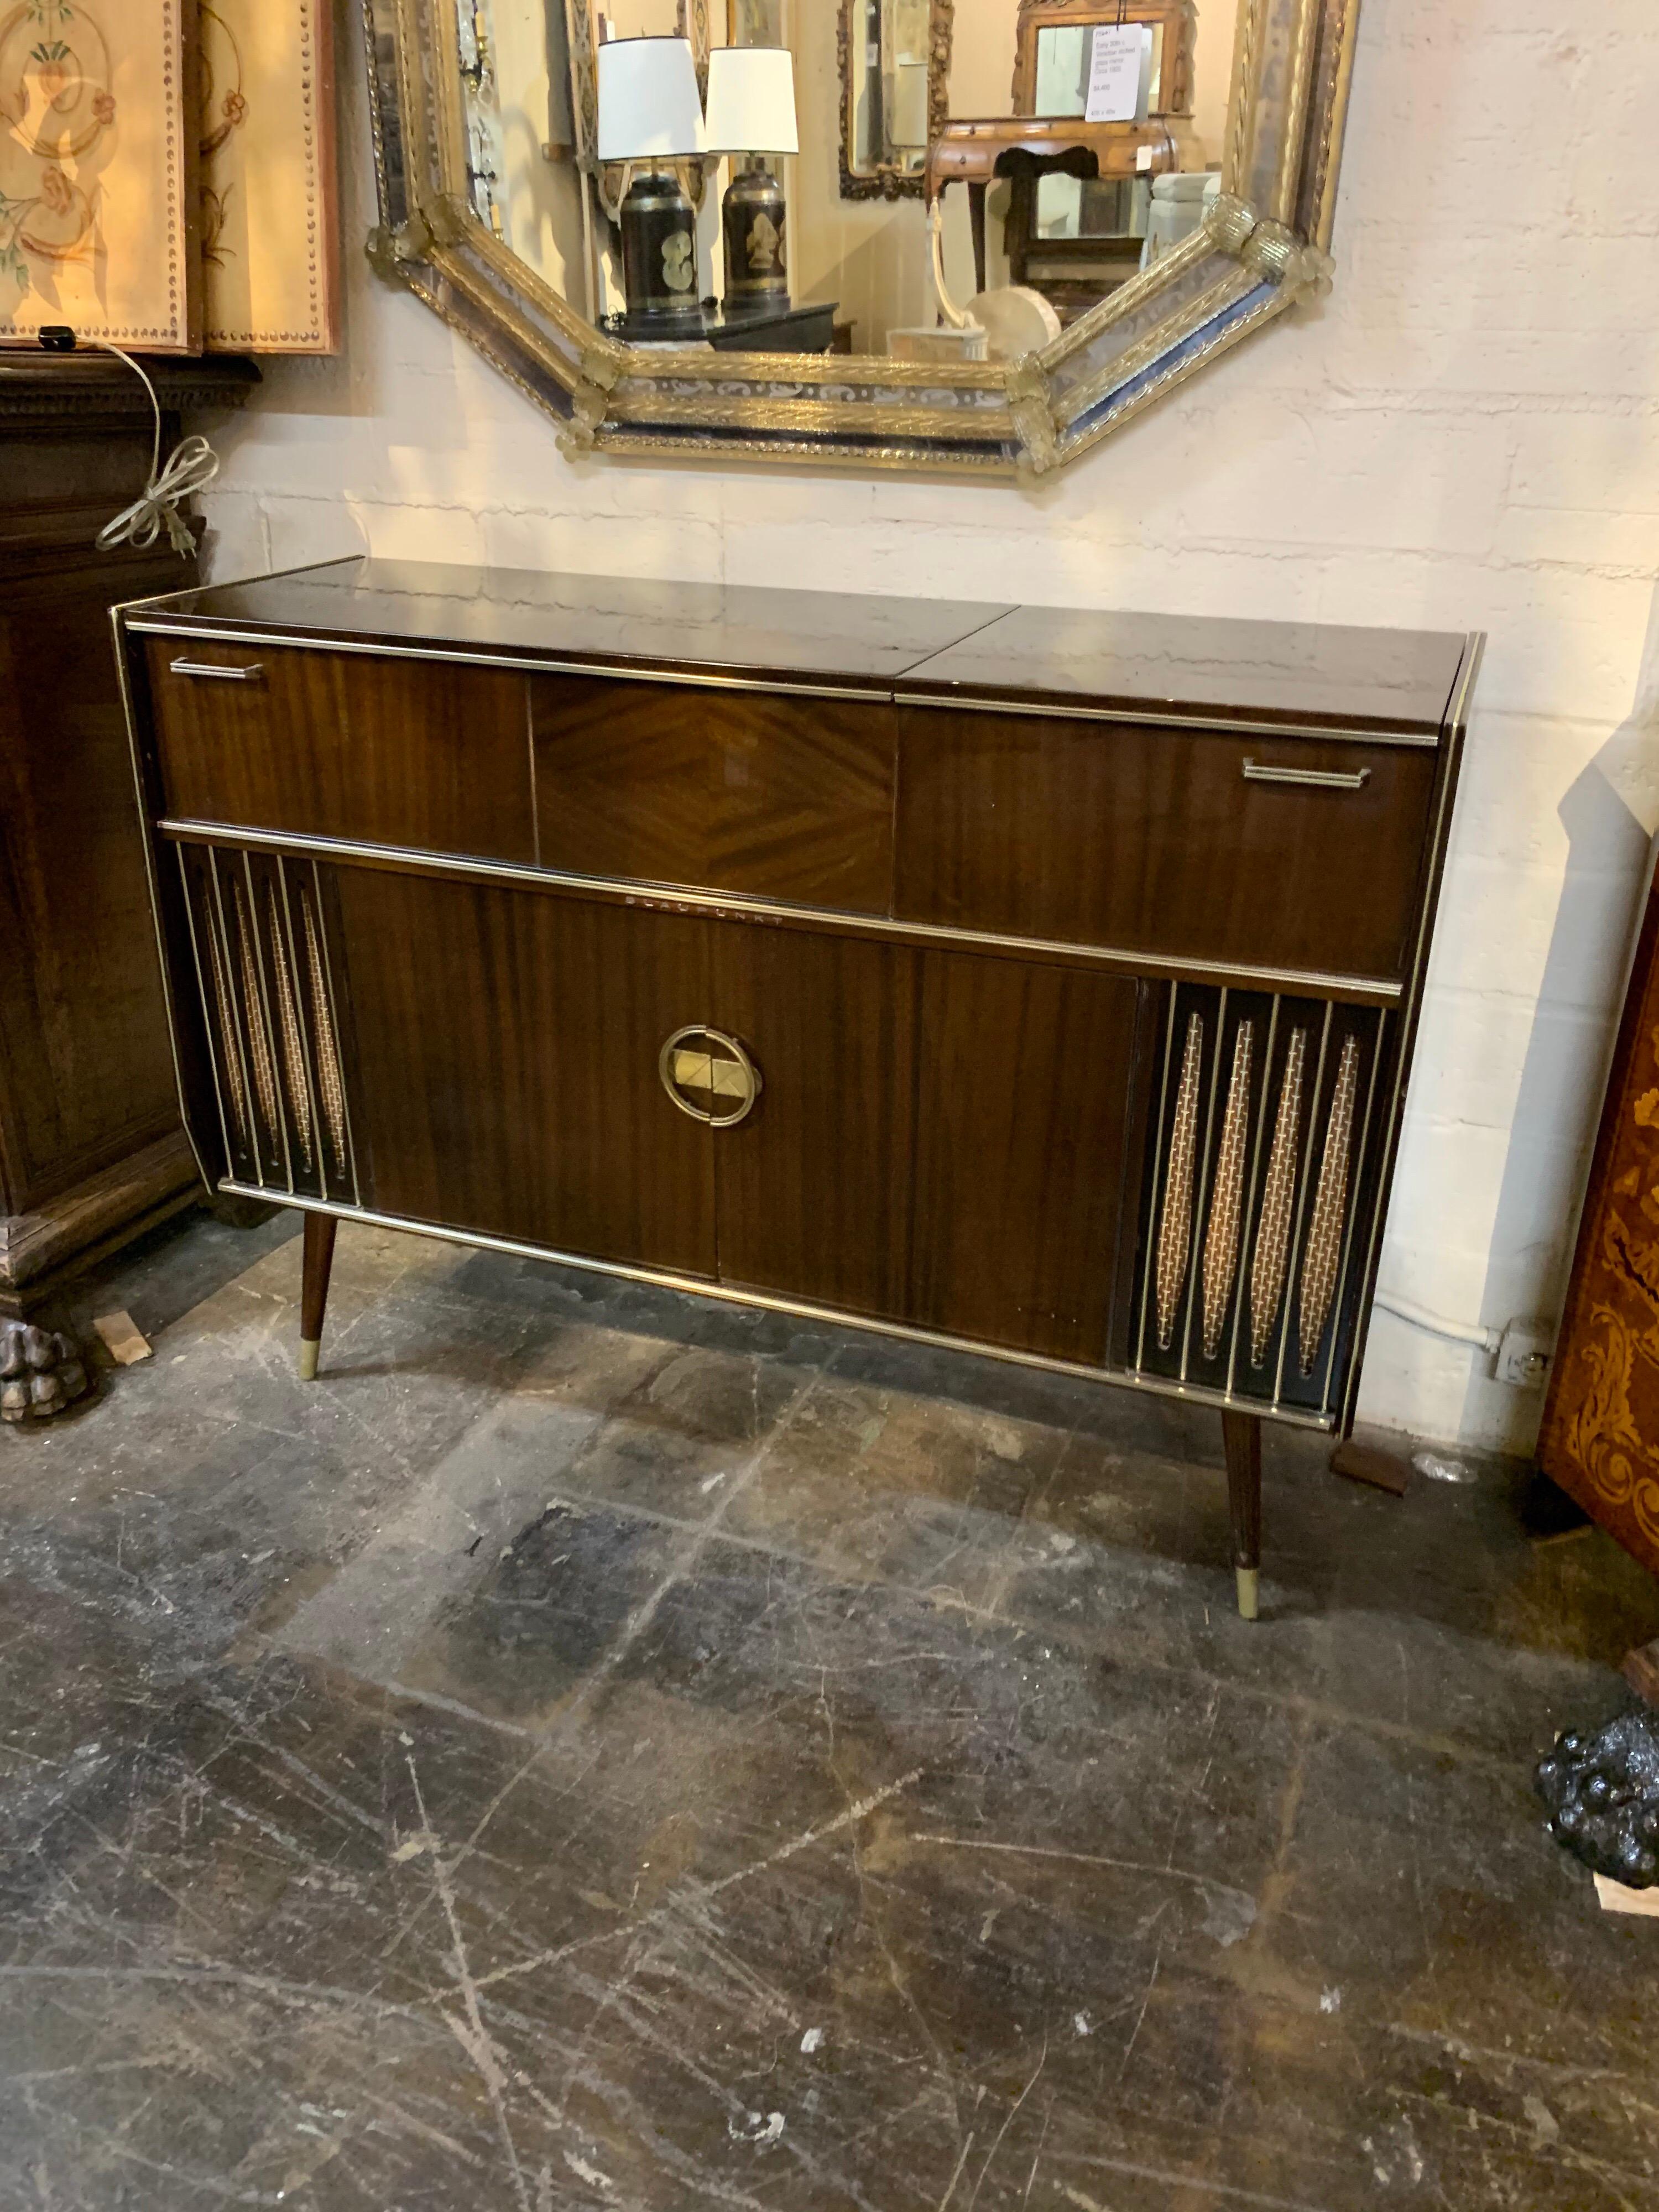 Very handsome midcentury mahogany and brass record console by Blaupunkt. Beautiful polish on this cabinet and the turntable is still in the cabinet. A fun piece that is a real blast from the past!